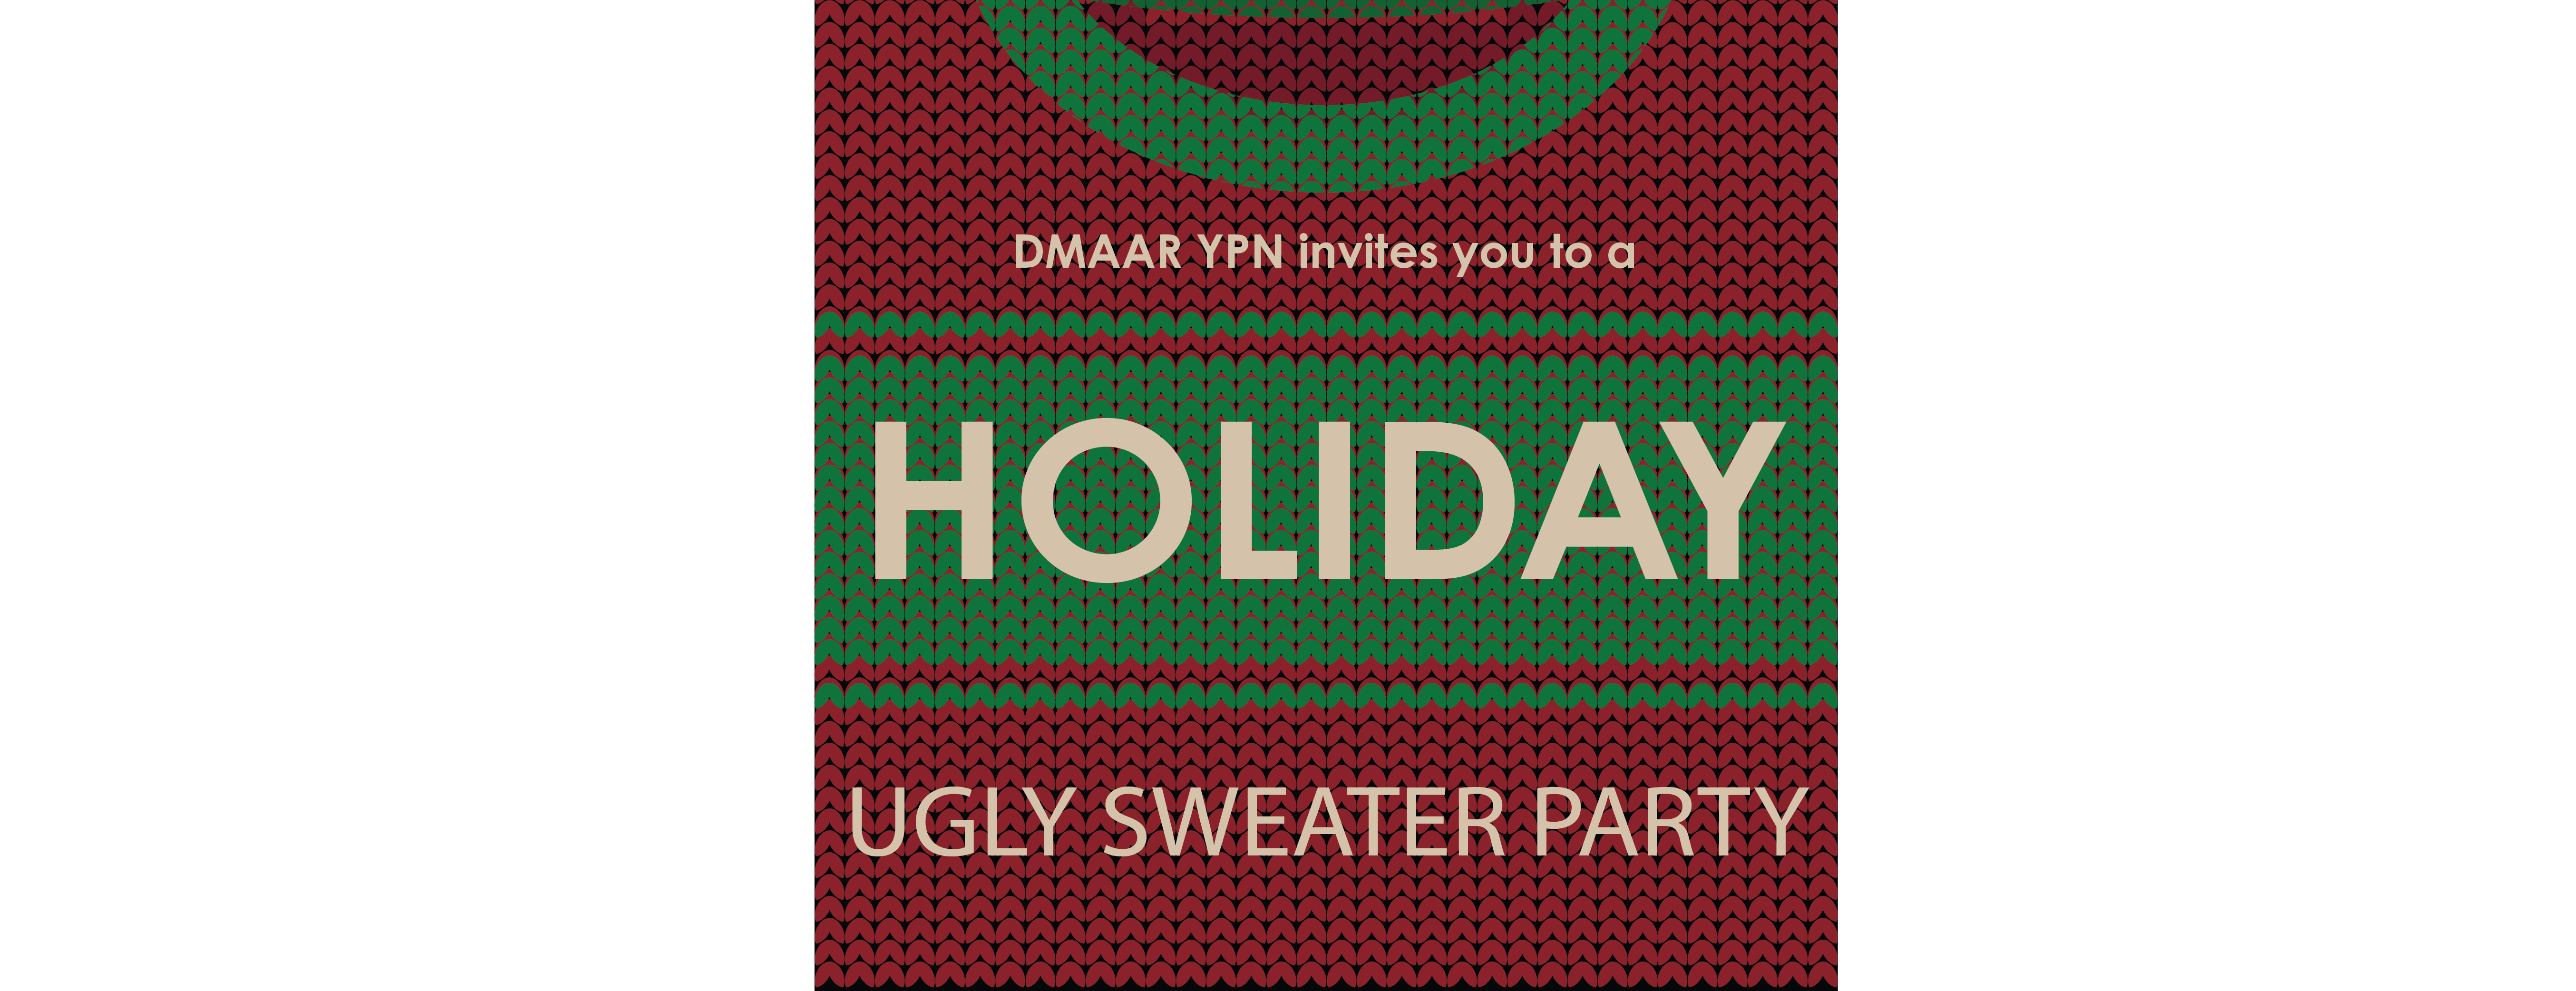 DMAAR YPN Ugly Sweater Party